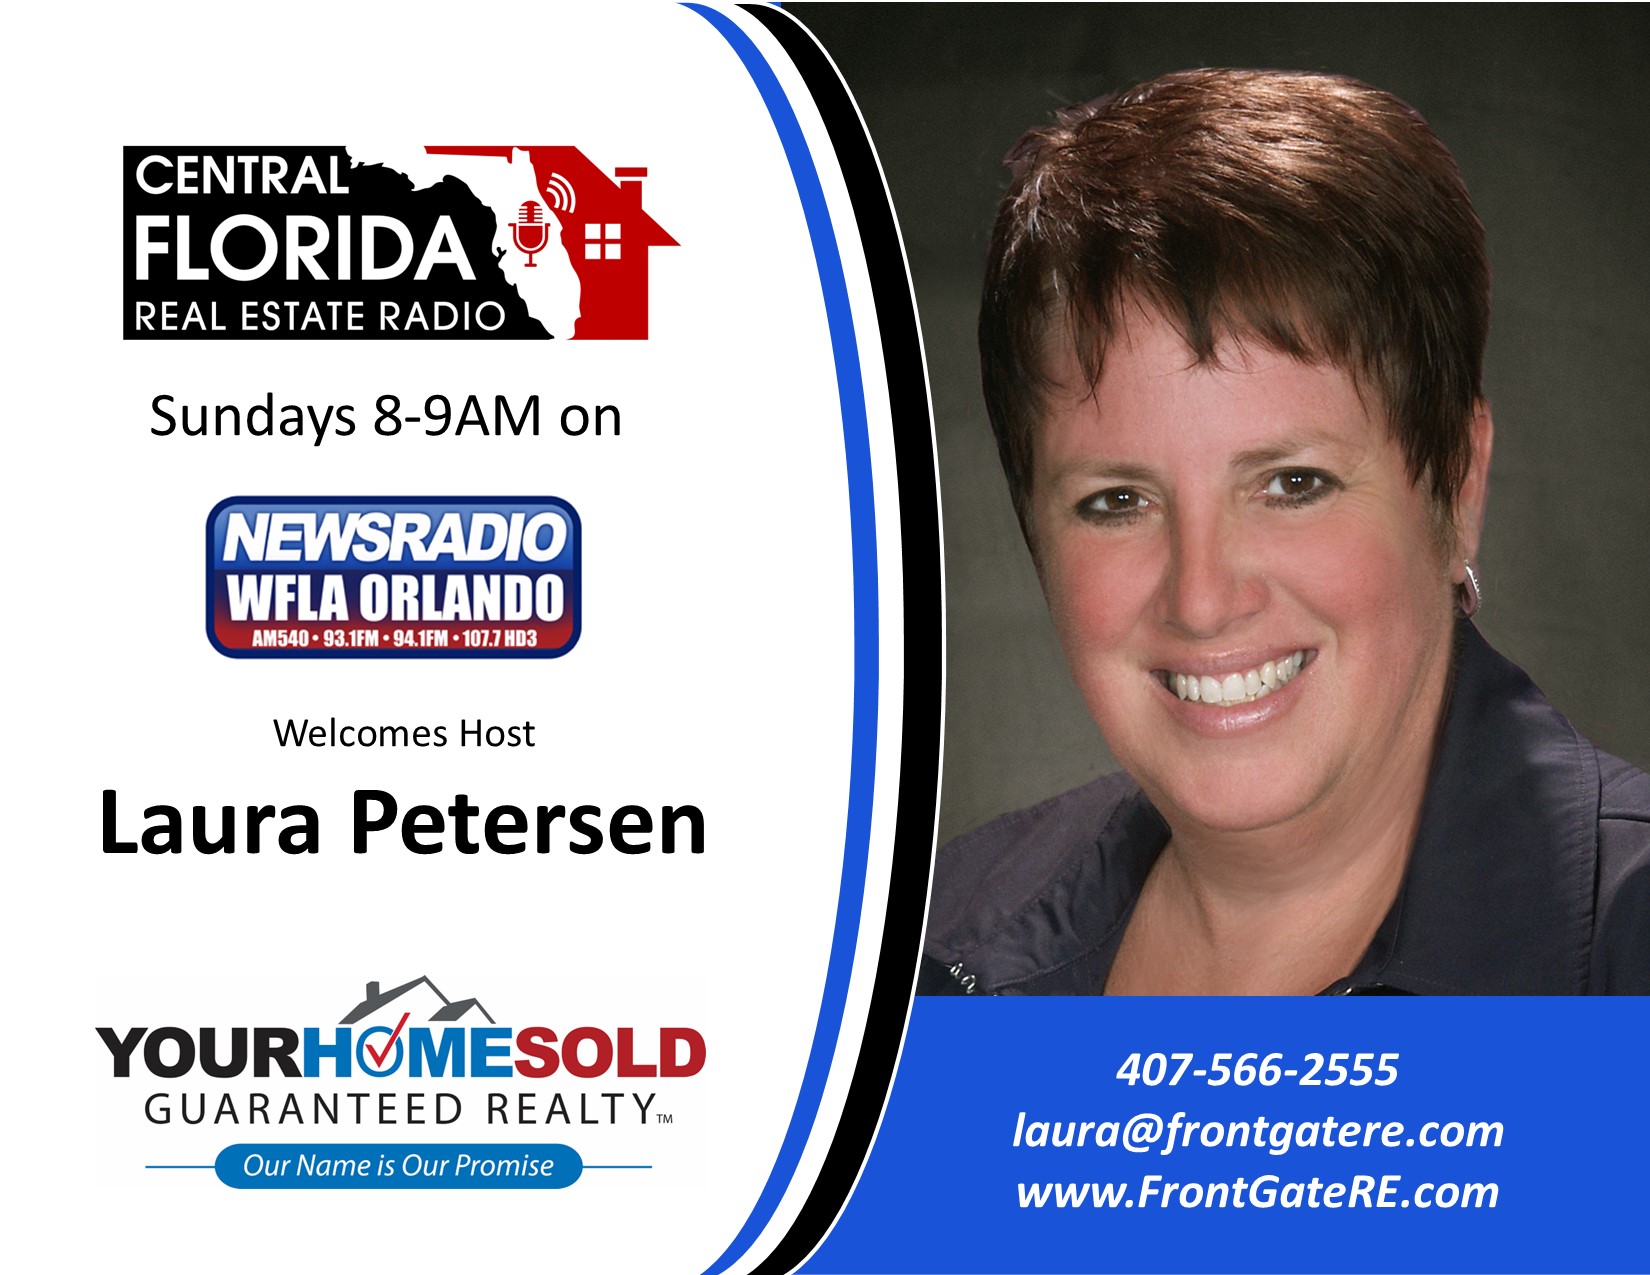 How to Sell Your Home Central Florida Real Estate Podcast 06-5-22 with Laura Petersen